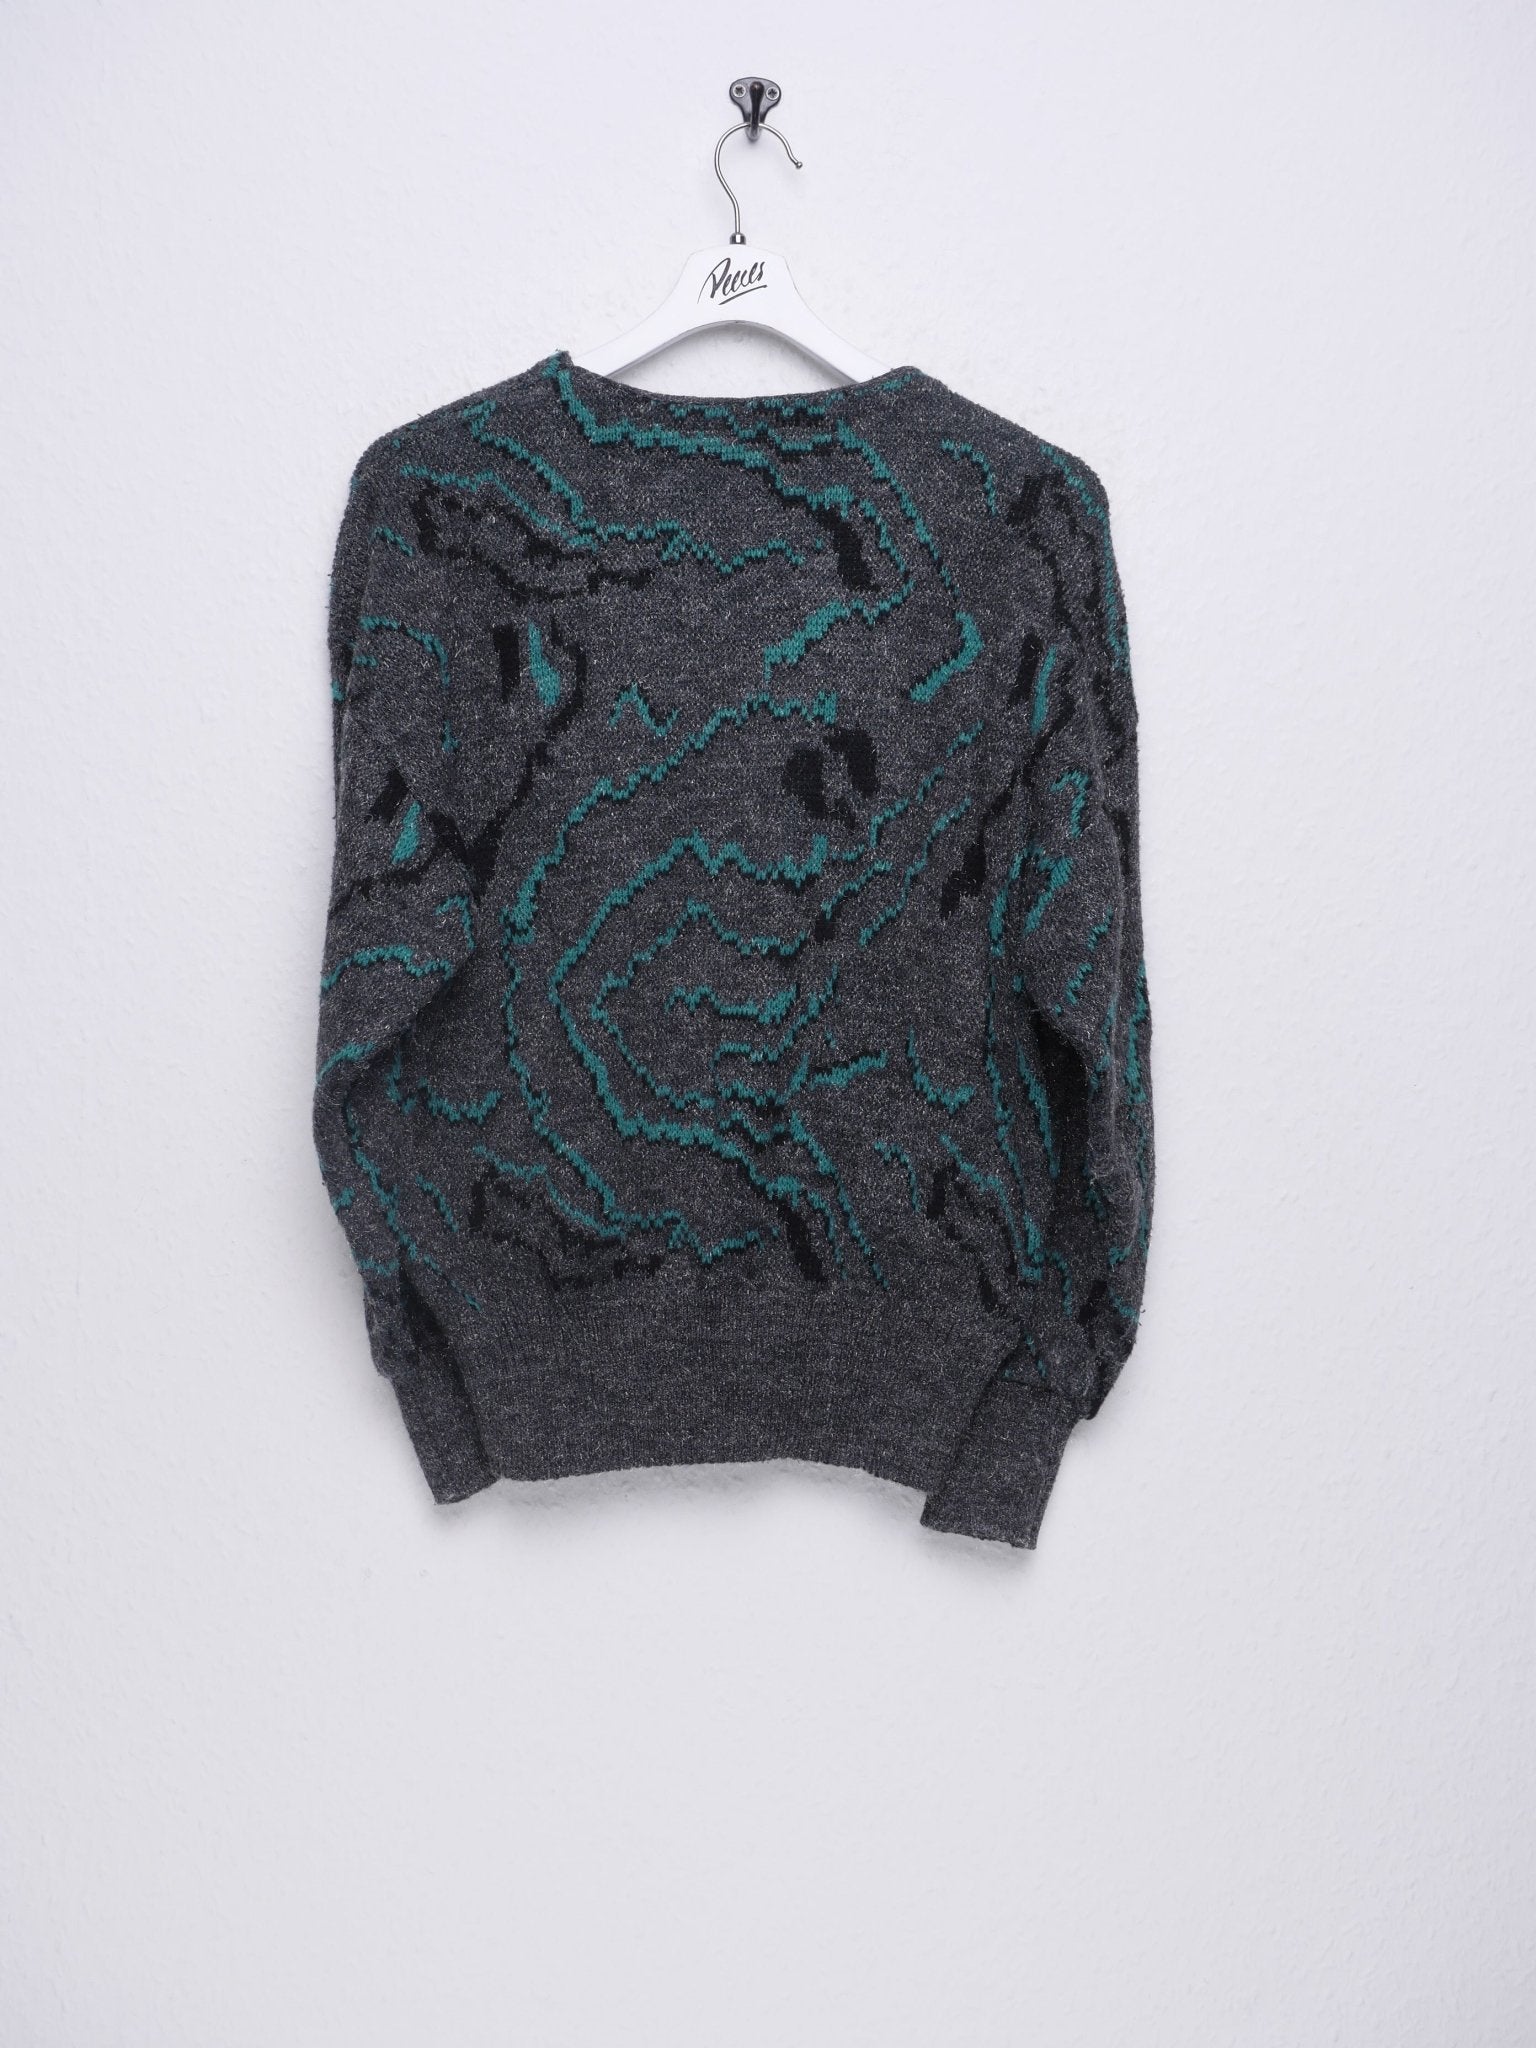 Vintage knitted Glitter Sweater - Peeces